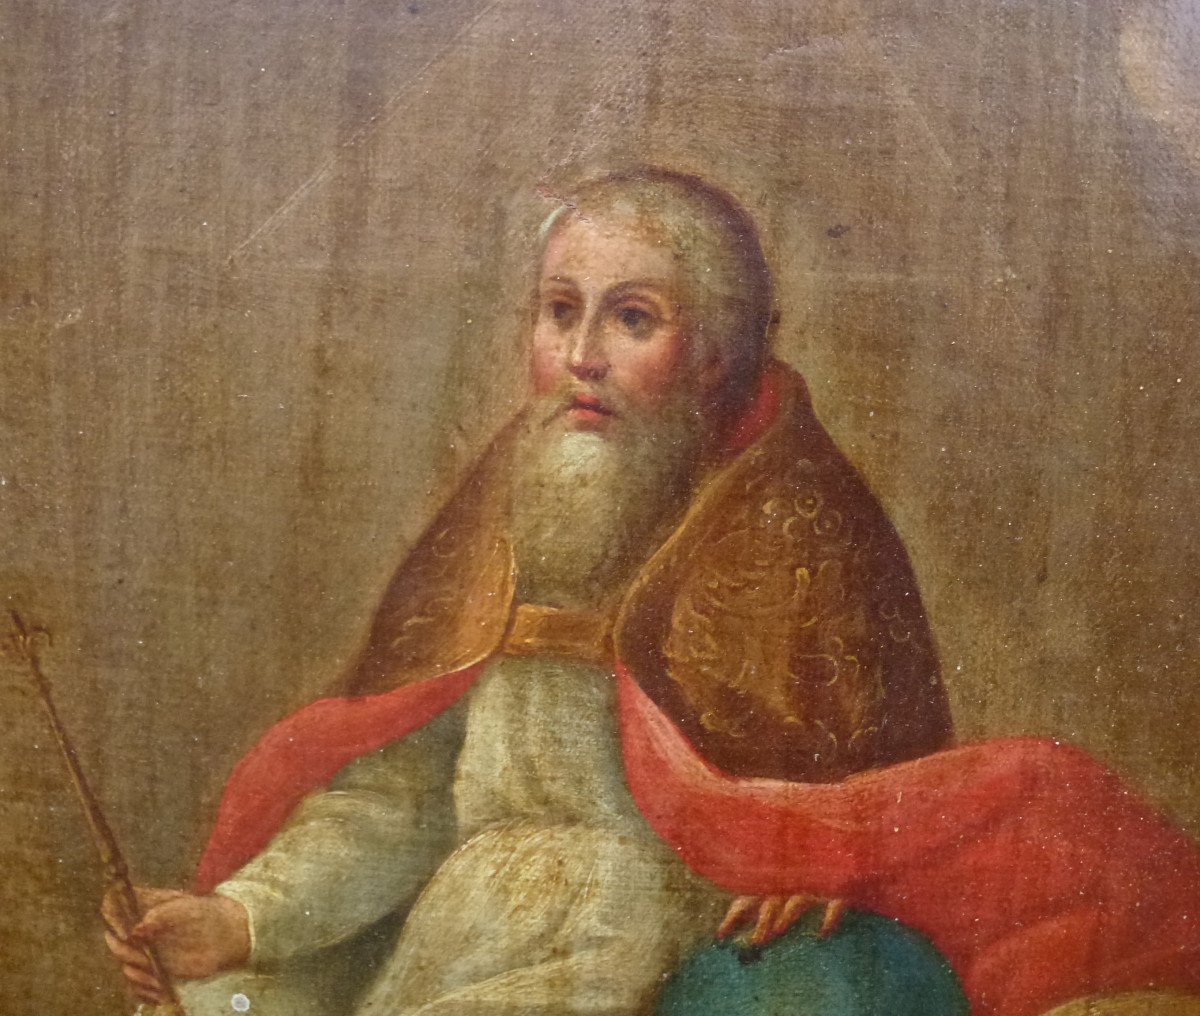 Religious Painting Portrait Of God The Father Oil/panel Late 18th Century-photo-1